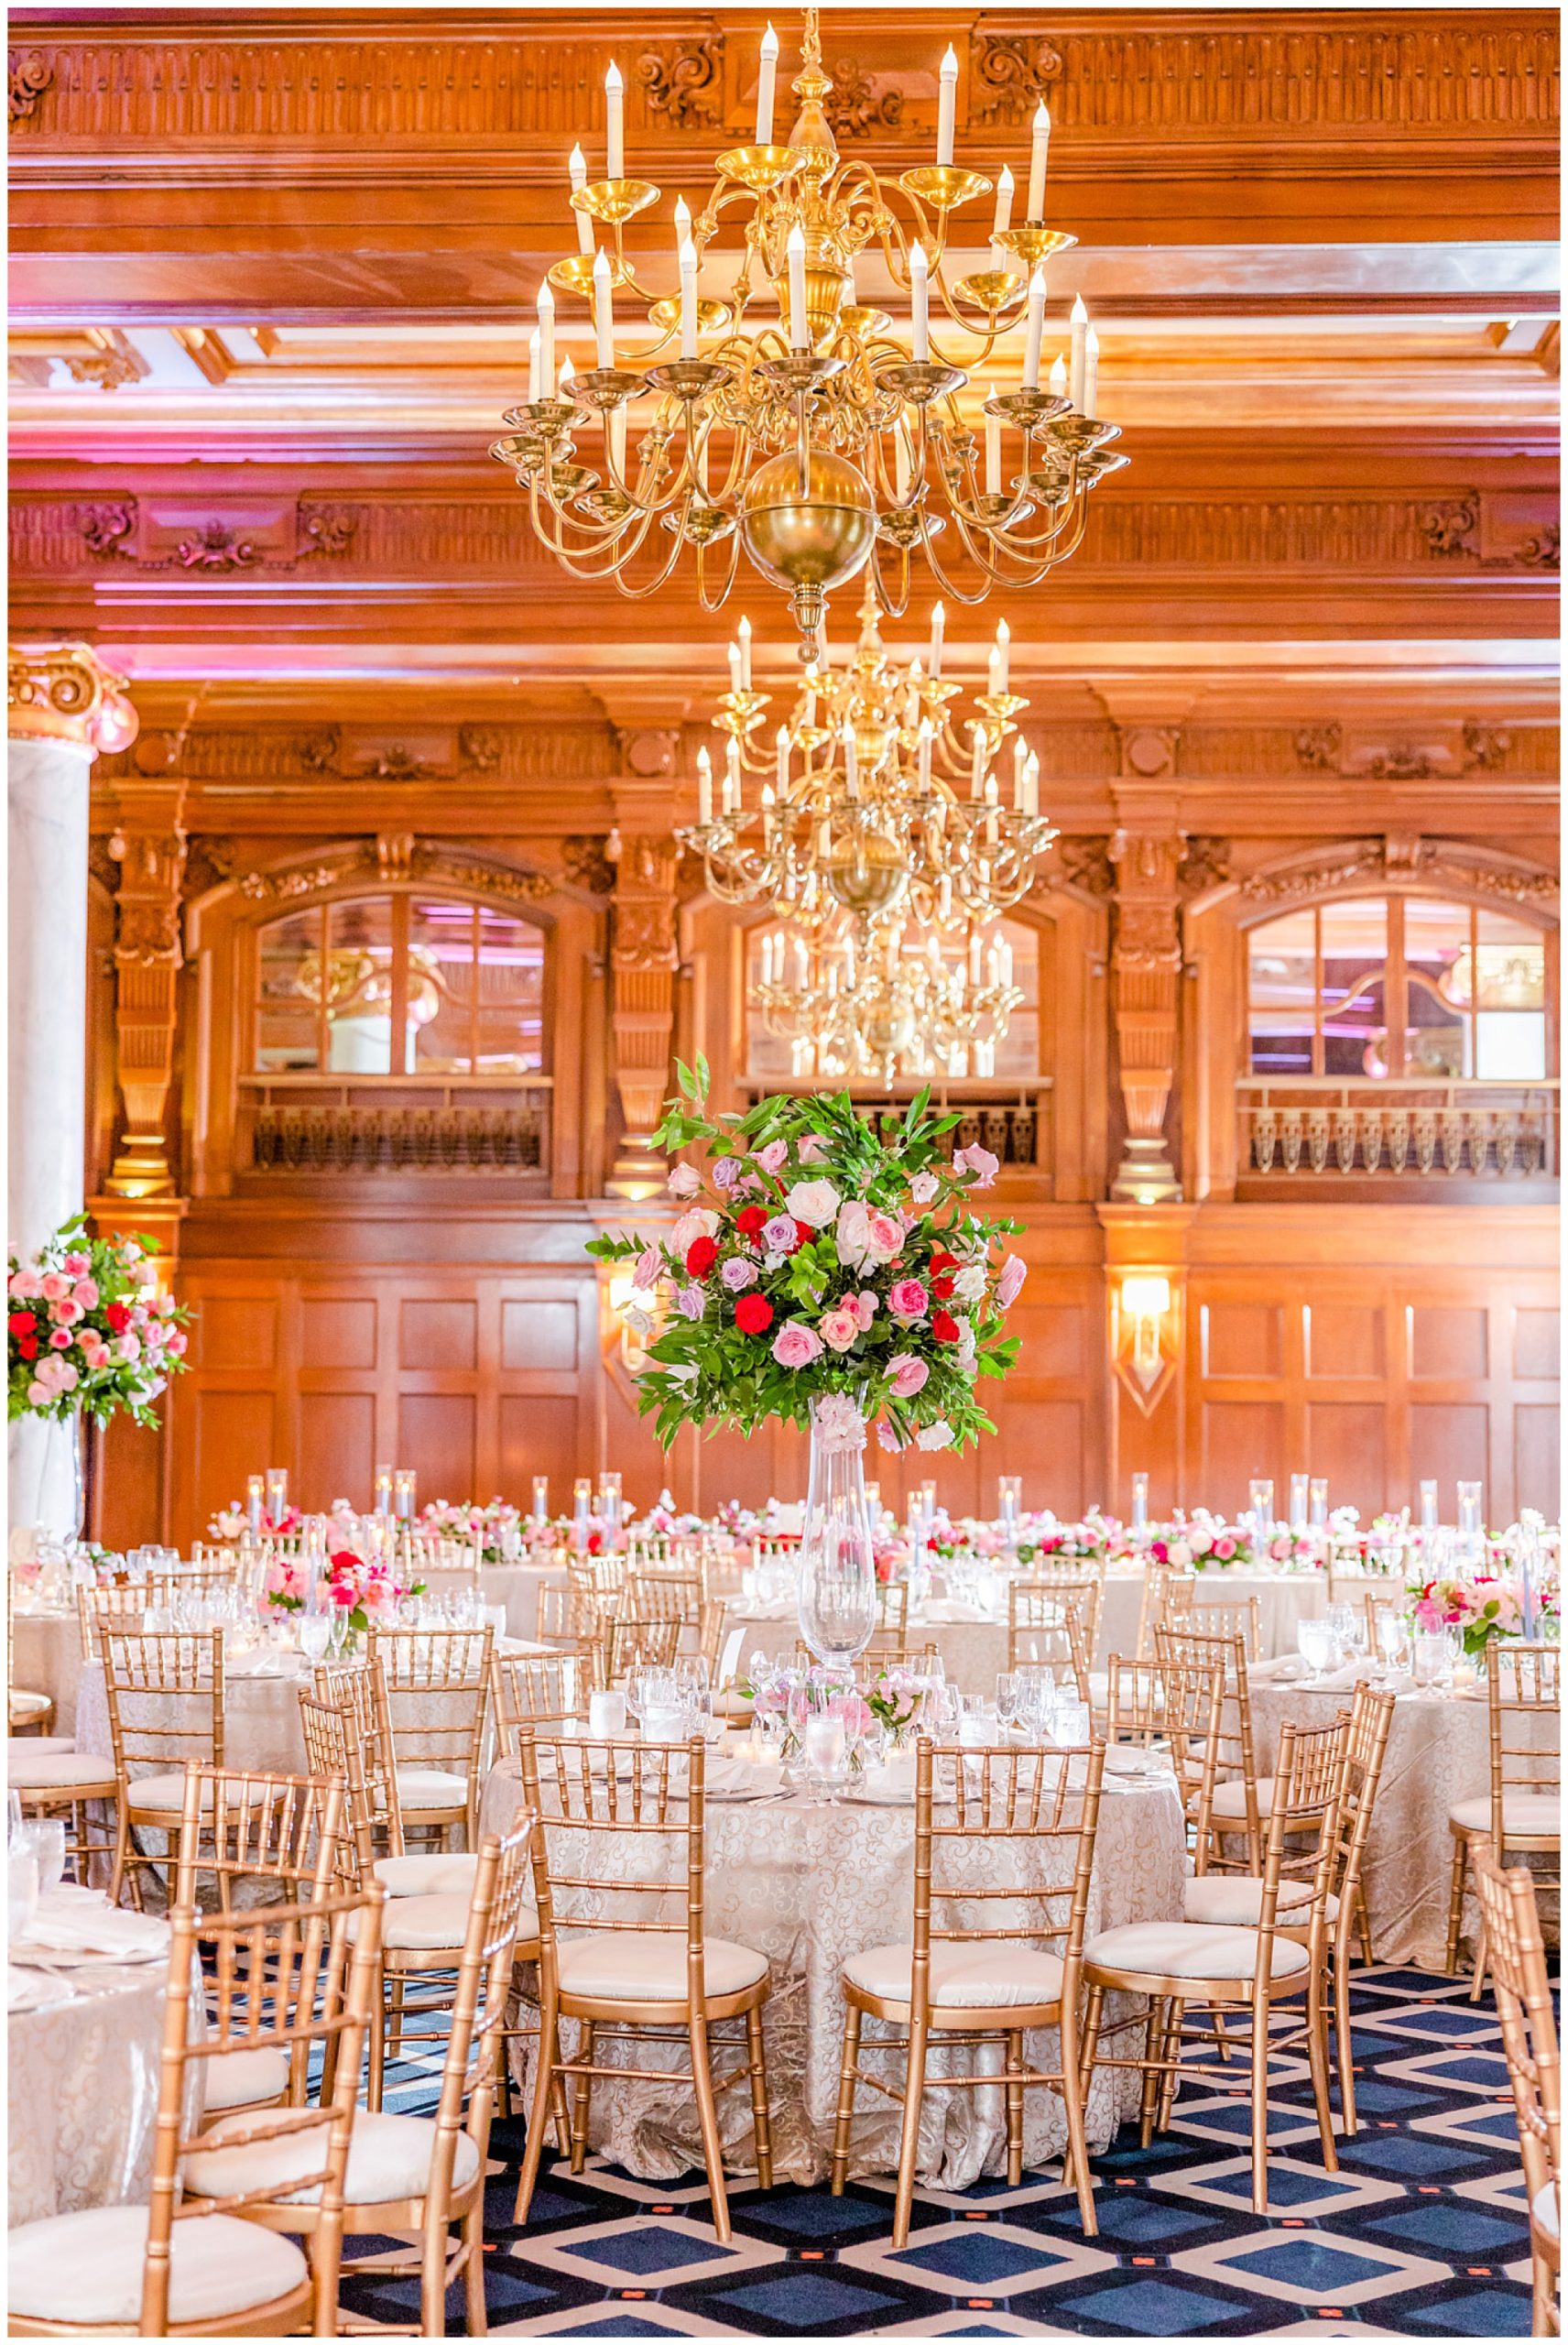 elegant French blue Willard Intercontinental wedding, DC wedding, elegent DC wedding, luxury DC wedding venue, high end DC wedding venue, DC wedding photographer, spring wedding aesthetic, spring wedding ideas, classic DC wedding, classic wedding ideas, Rachel E.H. Photography, French blue aesthetic, floral focused wedding reception, Victoria Clausen Floral Events, peony and rose reception florals, colorful wedding reception